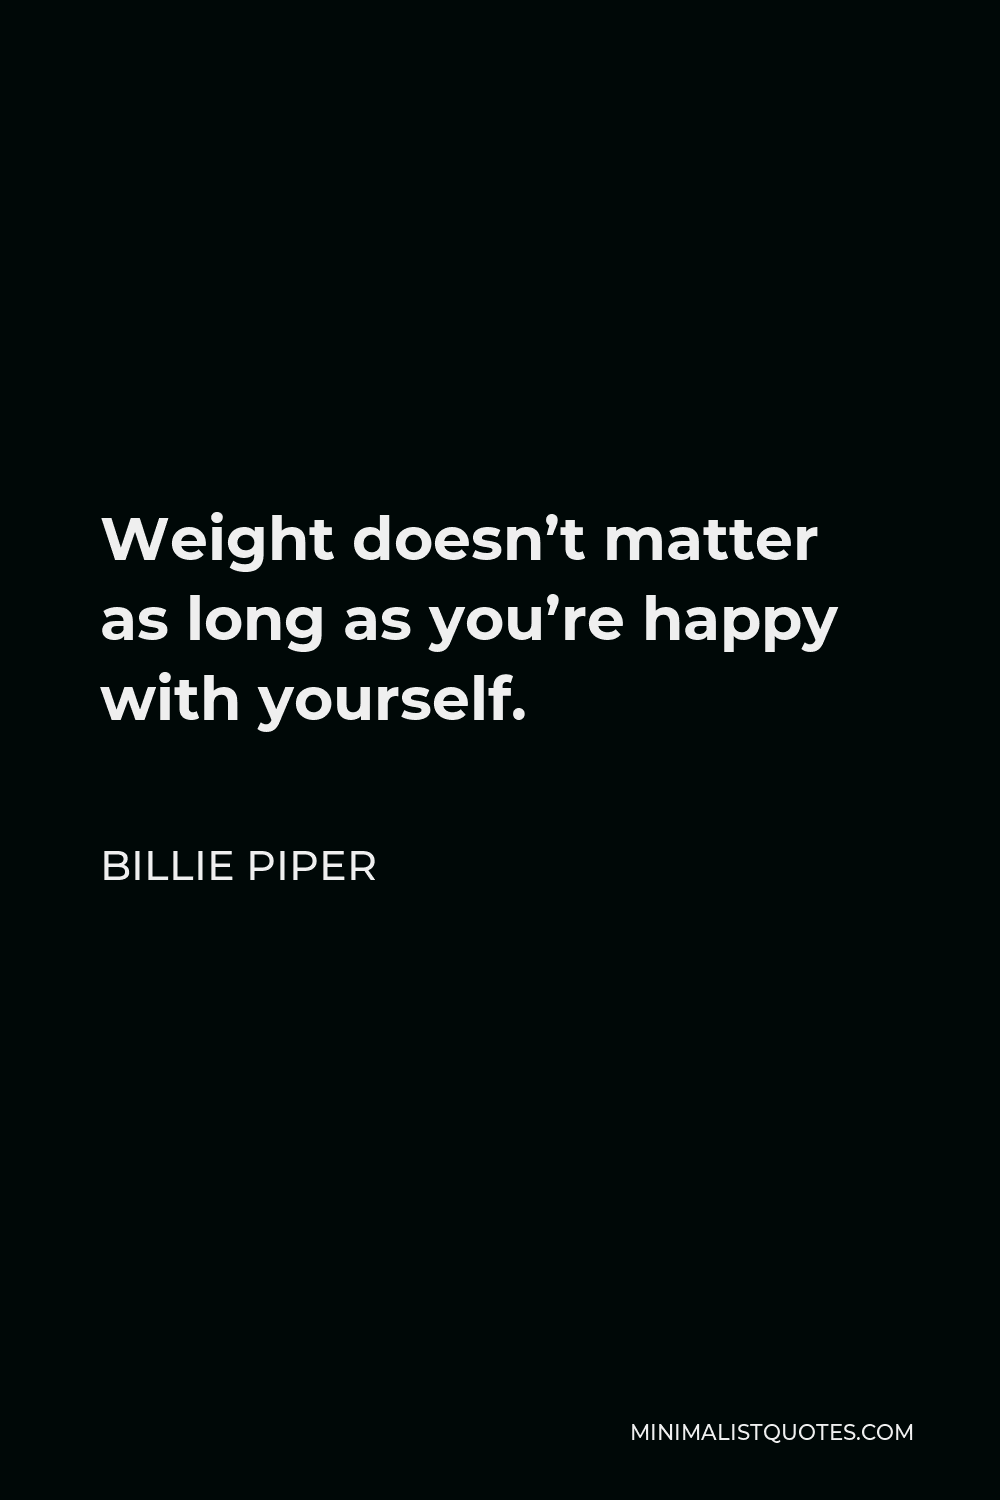 Billie Piper Quote - Weight doesn’t matter as long as you’re happy with yourself.